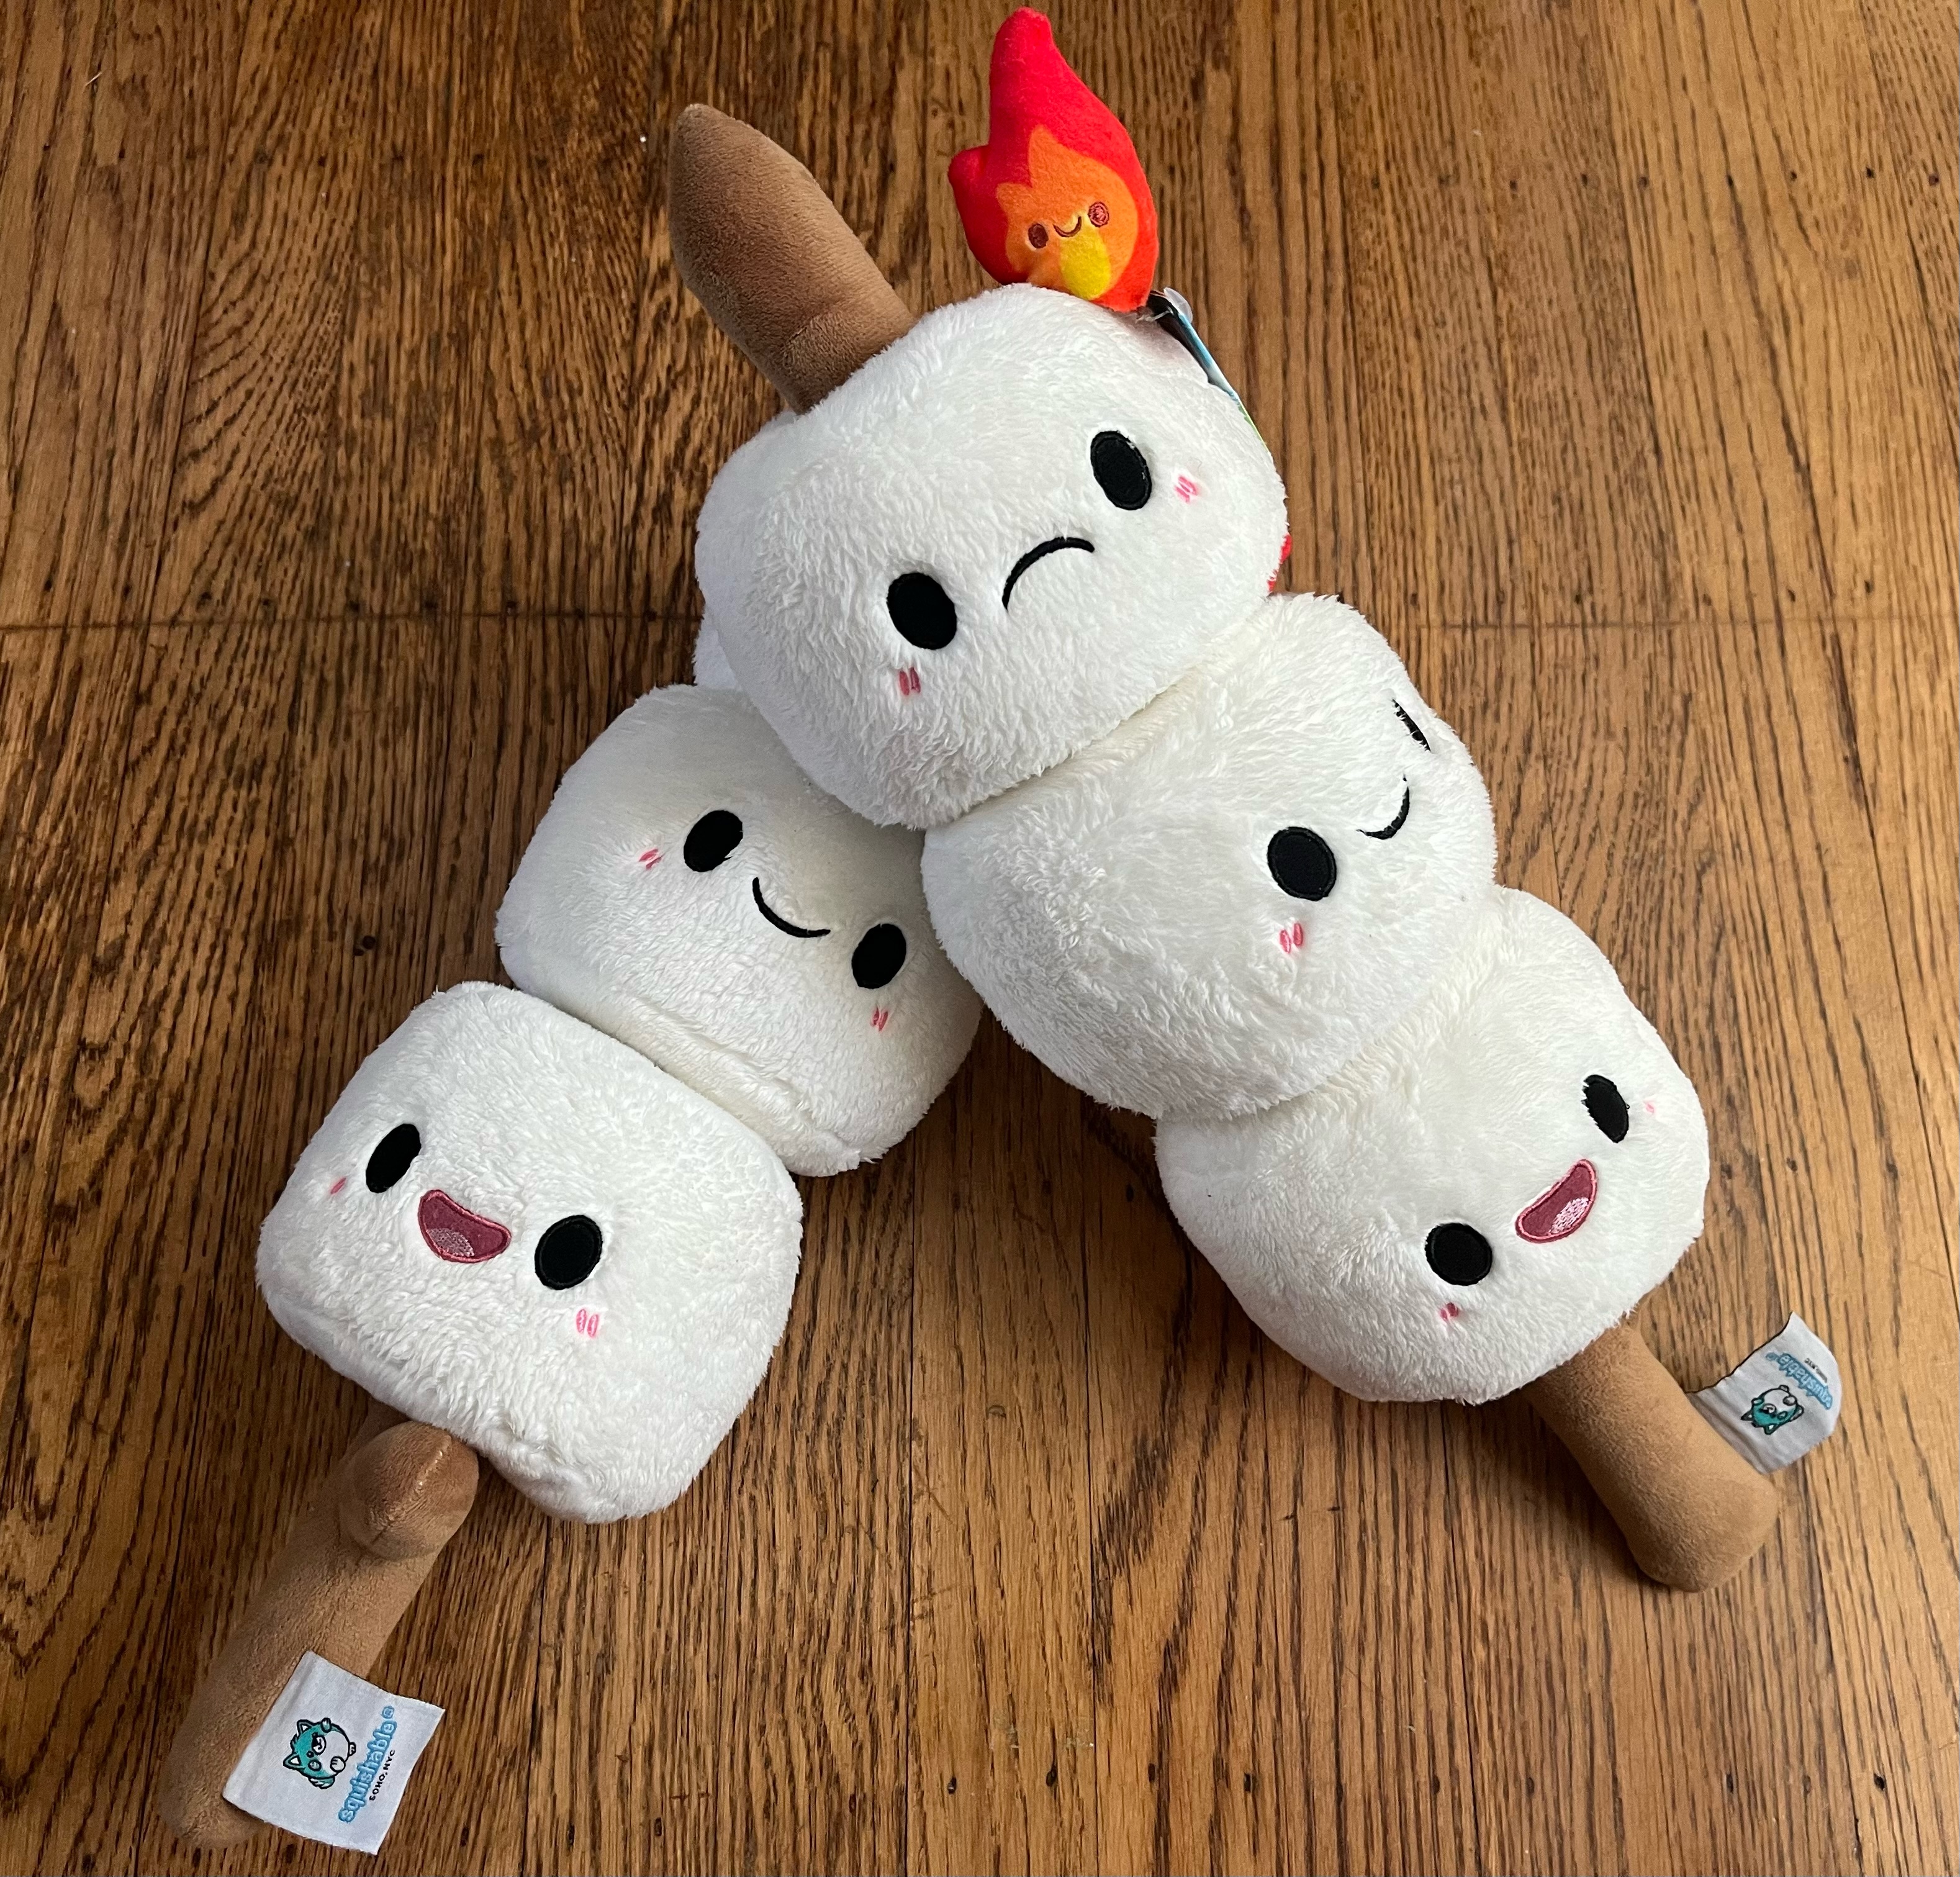 Squishable mini comfort food roasted marshmallows on stick s'mores stuffed toy